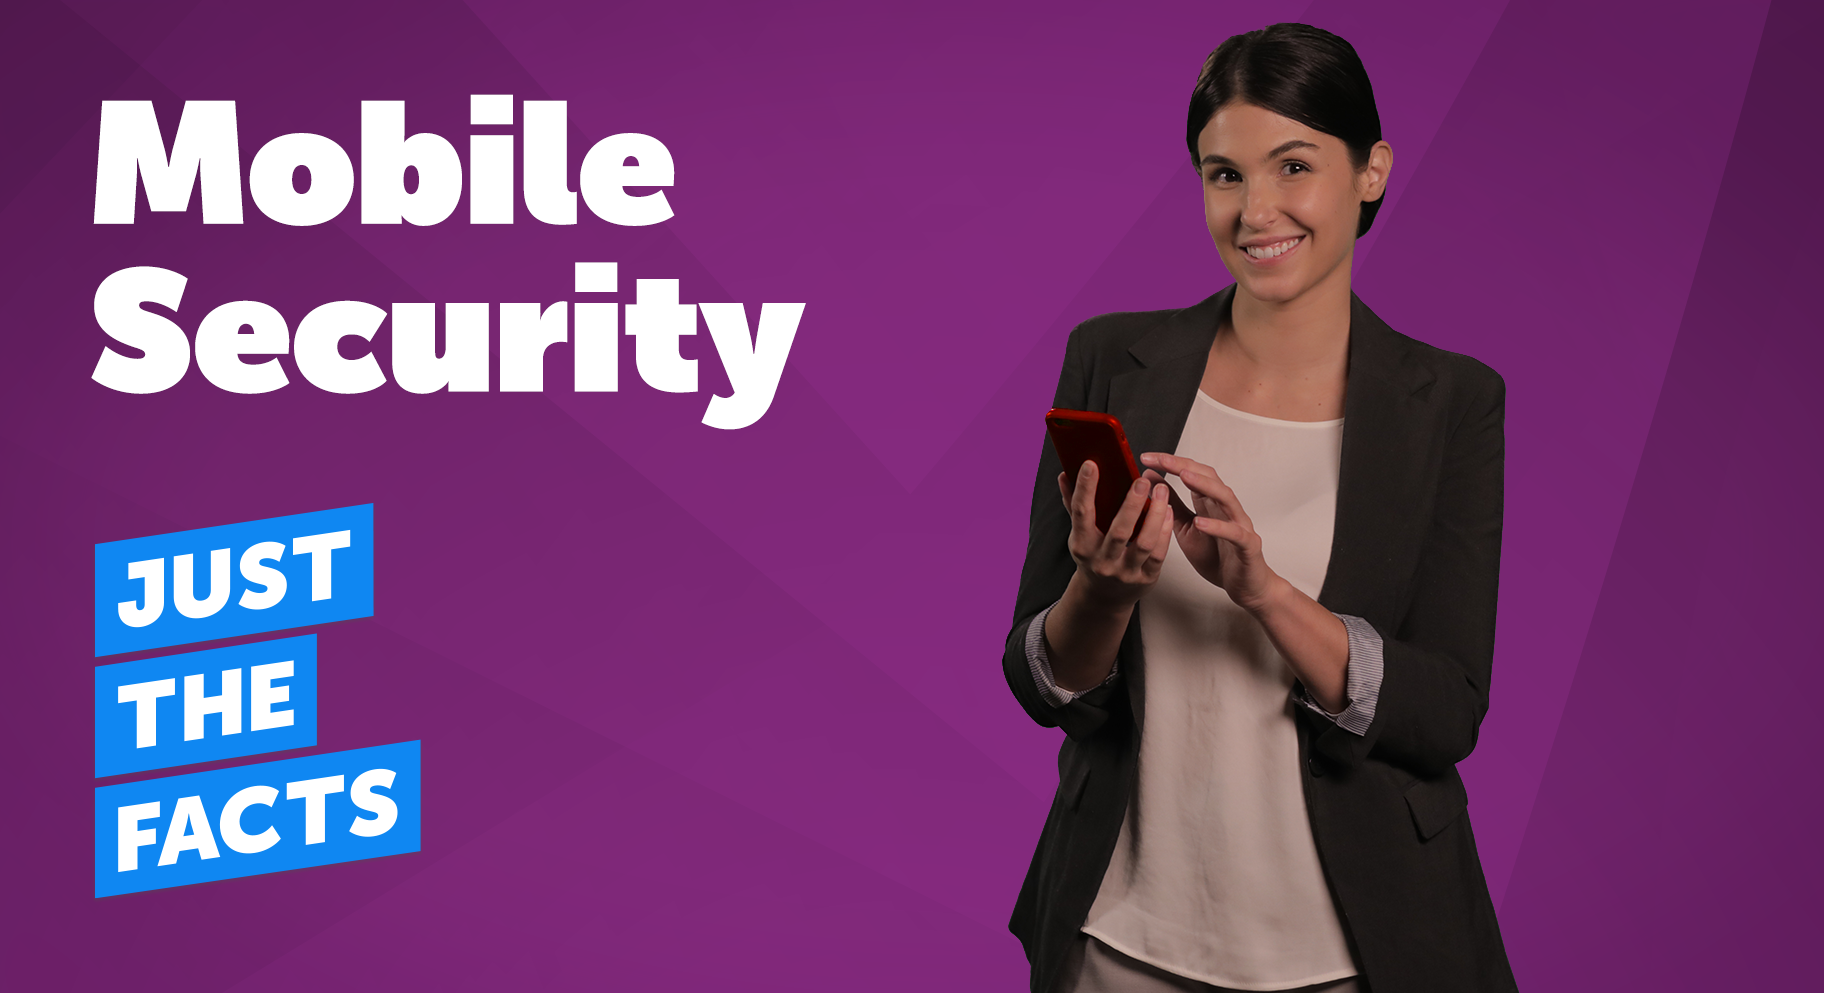 Just the Facts: Mobile Security